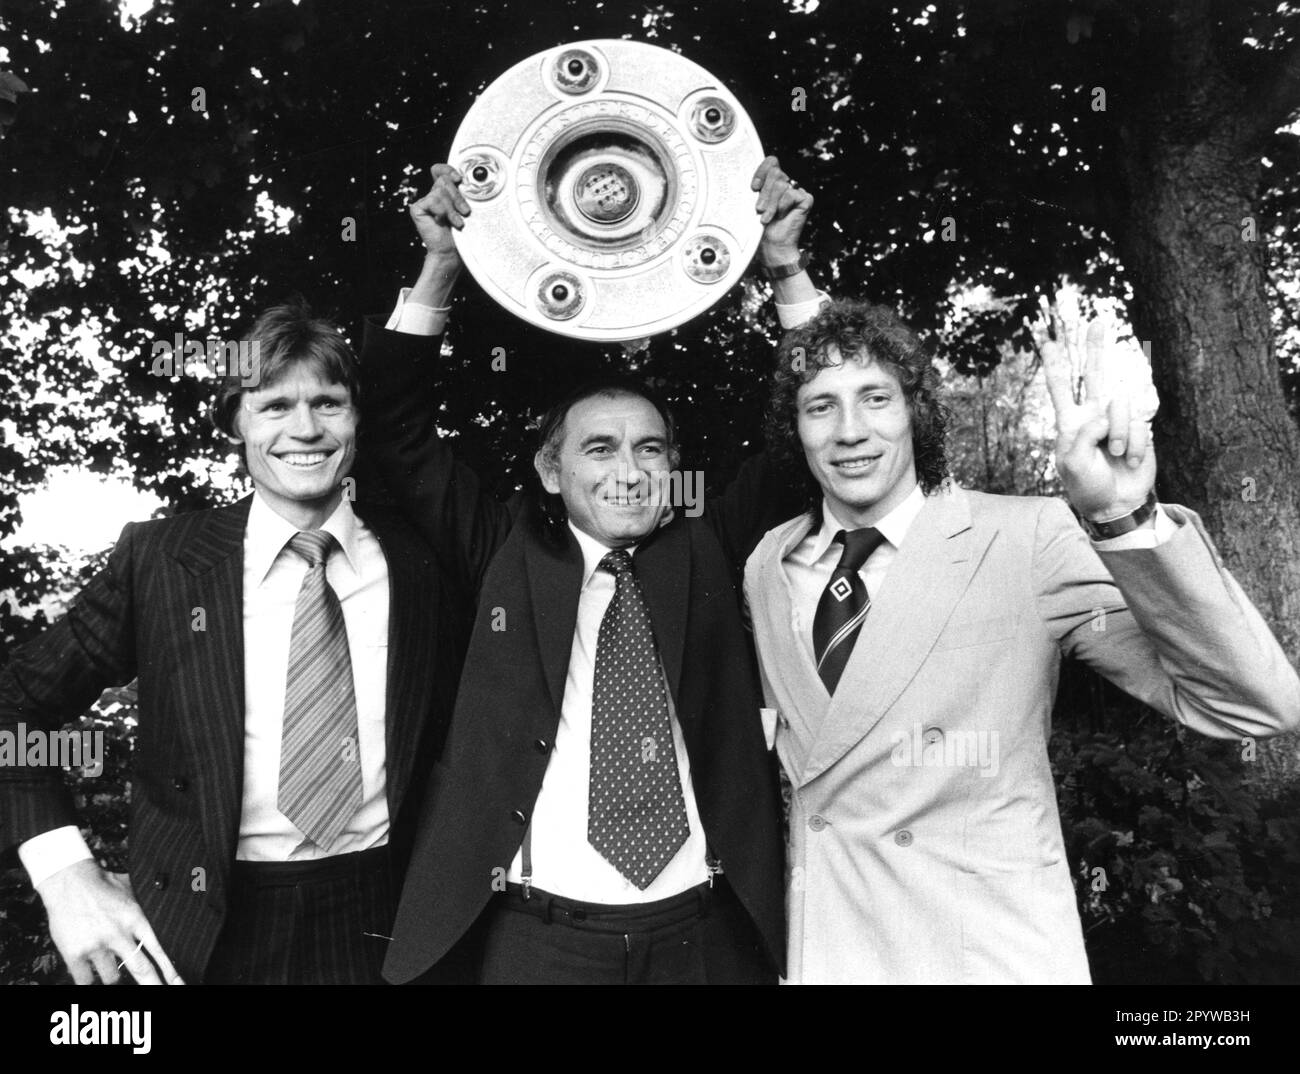 German Soccer League Season 1978/79. 1979 German Soccer Champion Hamburger SV. Peter Nogly, Branco Zebec and Rudi Kargus (from left) present the championship trophy Rec. 09.06.1979. For journalistic use only! Only for editorial use! [automated translation] Stock Photo